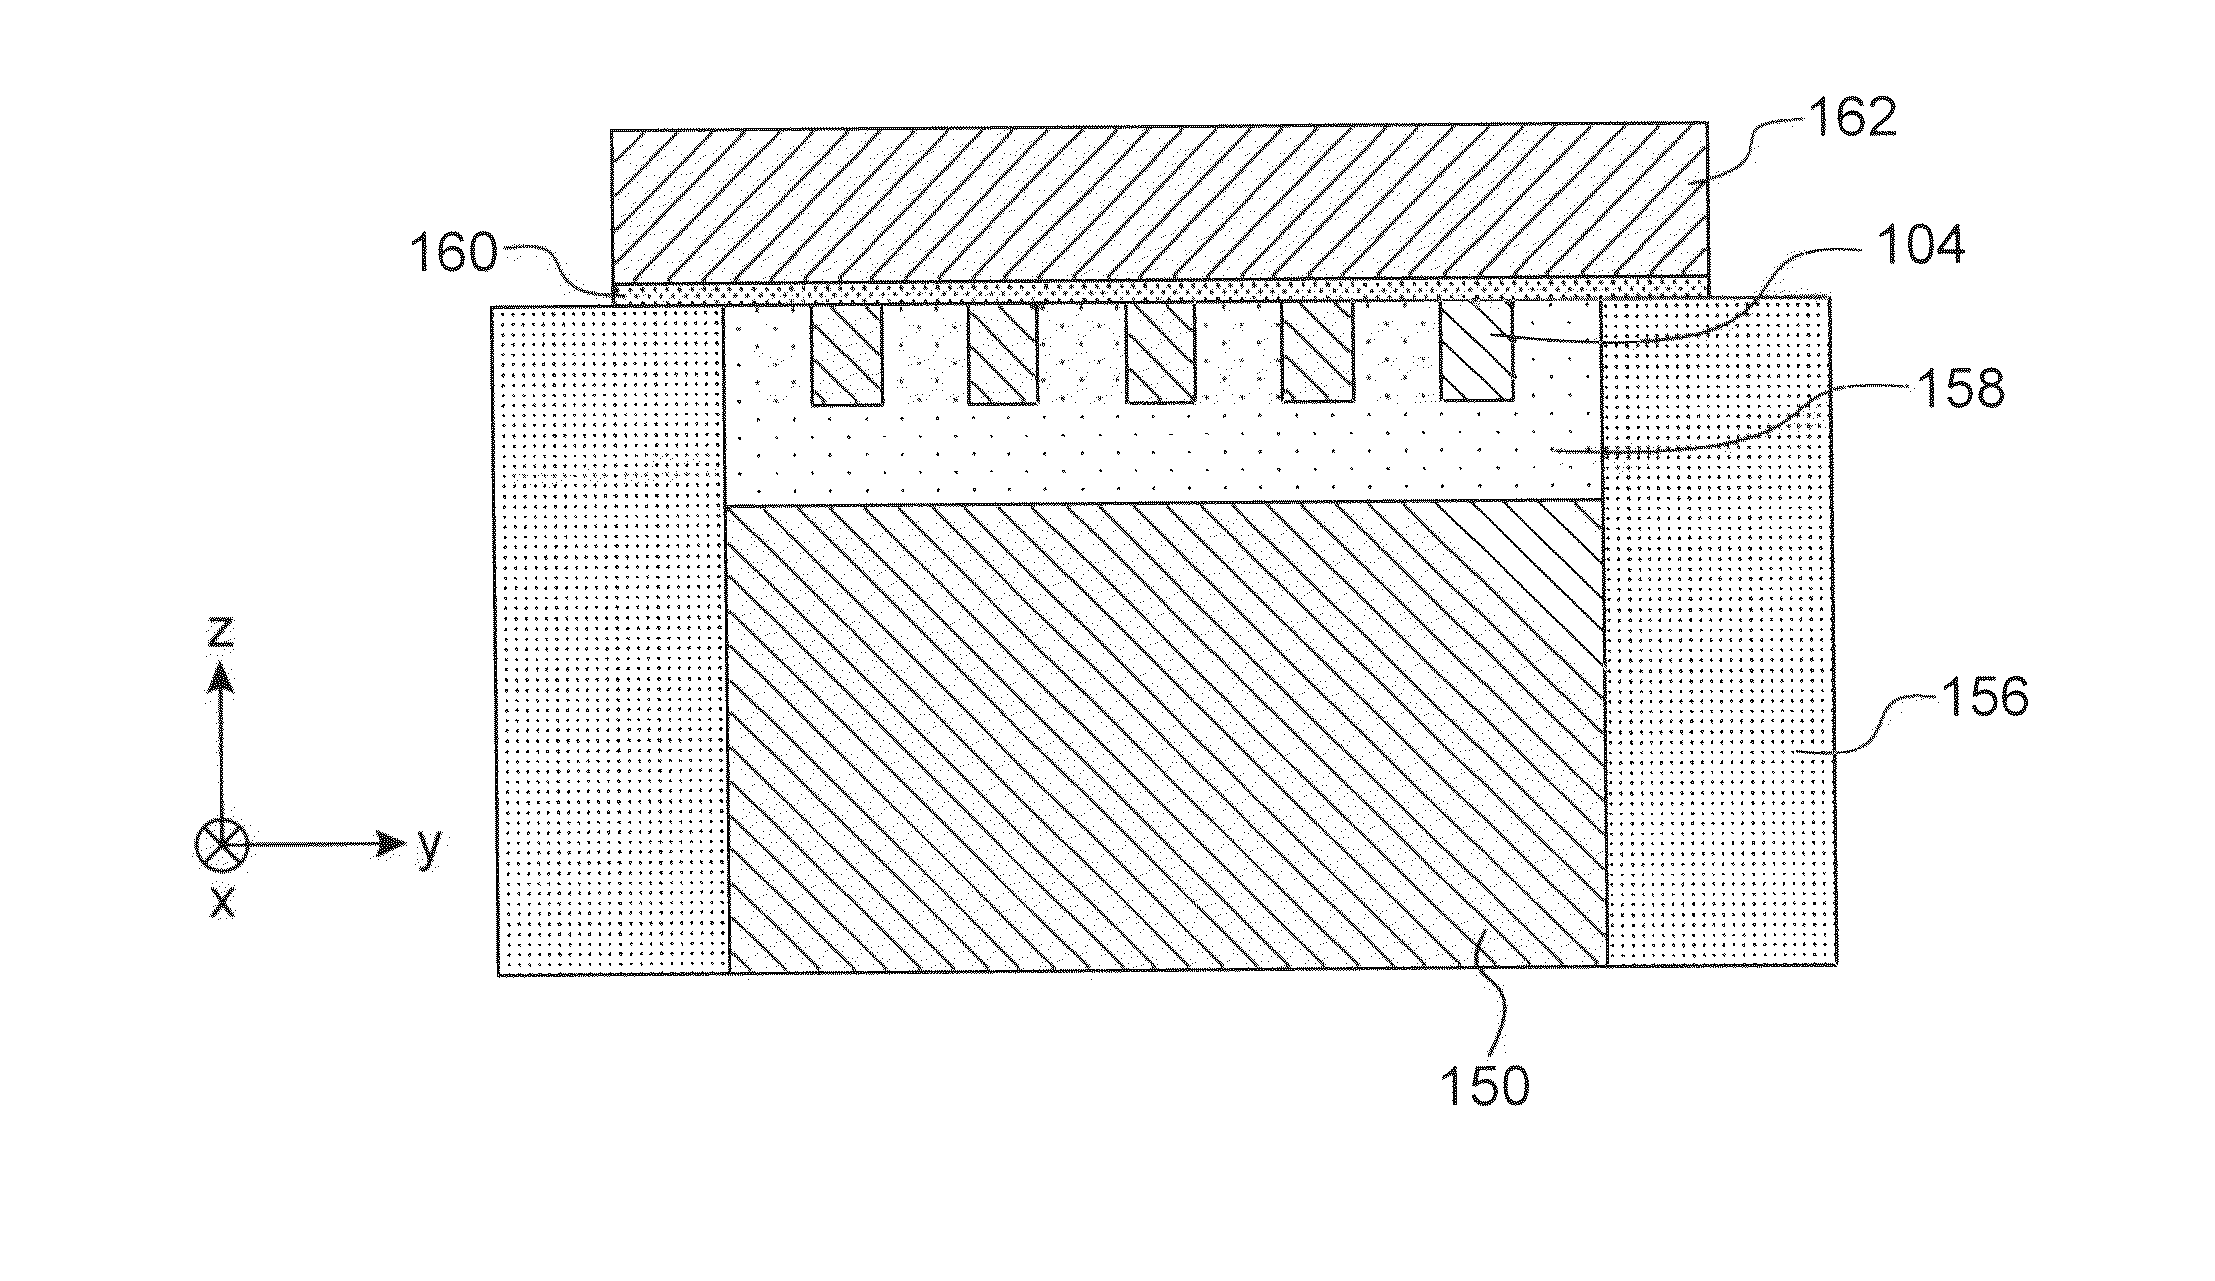 Nanowire semiconductor device partially surrounded by a grating